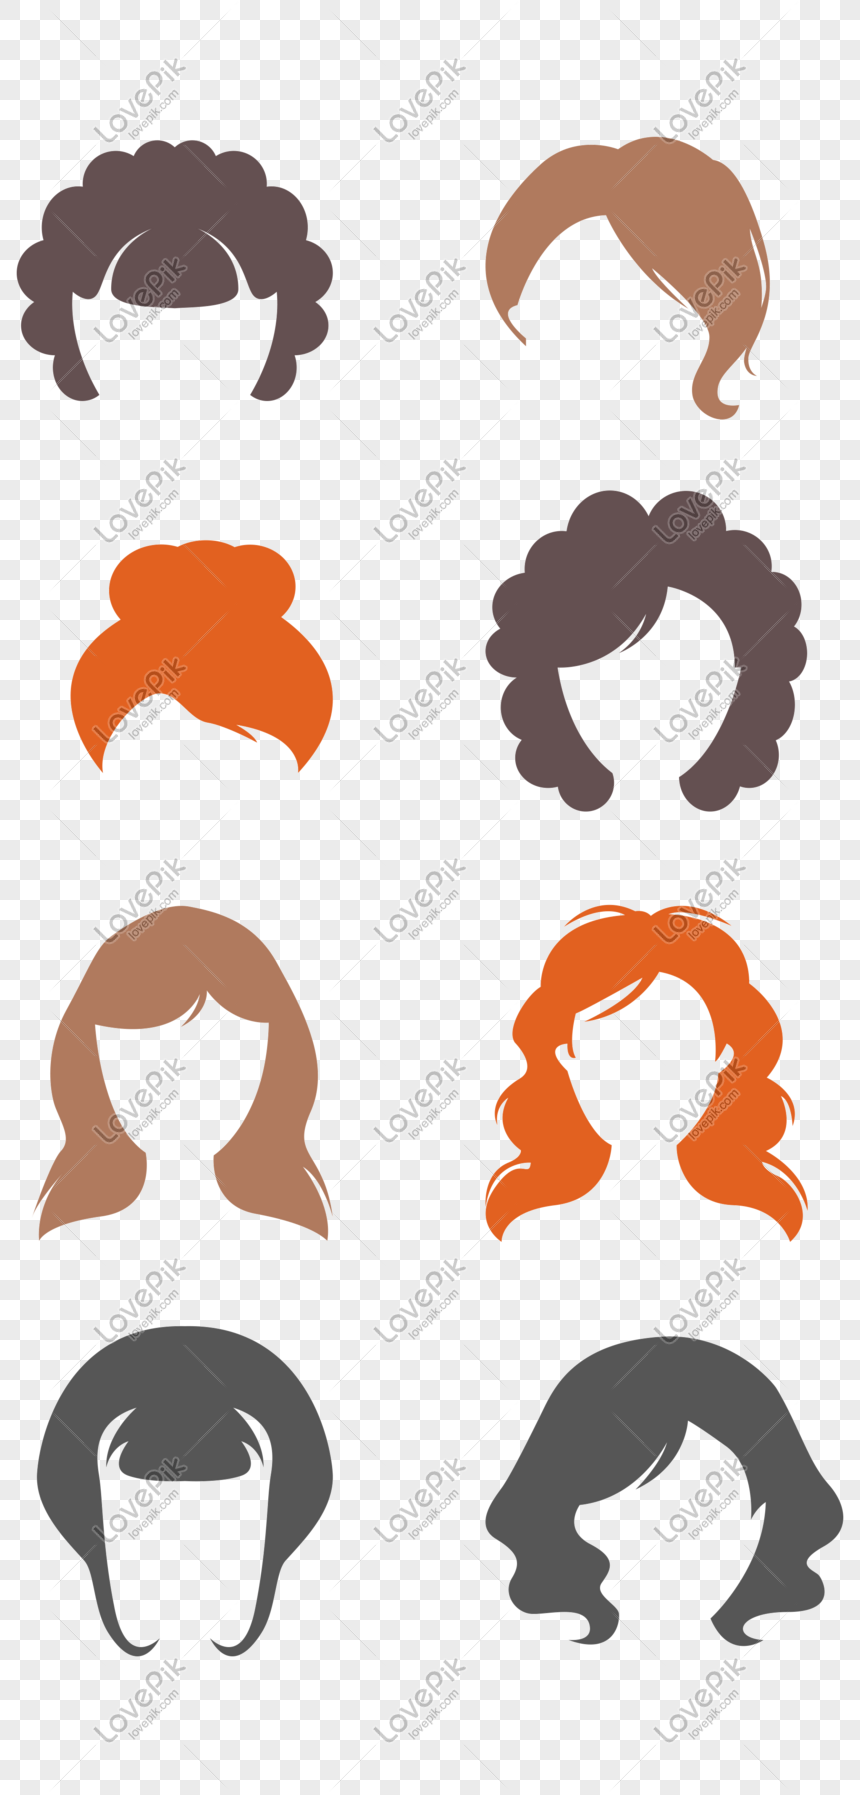 Cartoon Vector Girls Different Hairstyles PNG Transparent Background And  Clipart Image For Free Download - Lovepik | 610352960